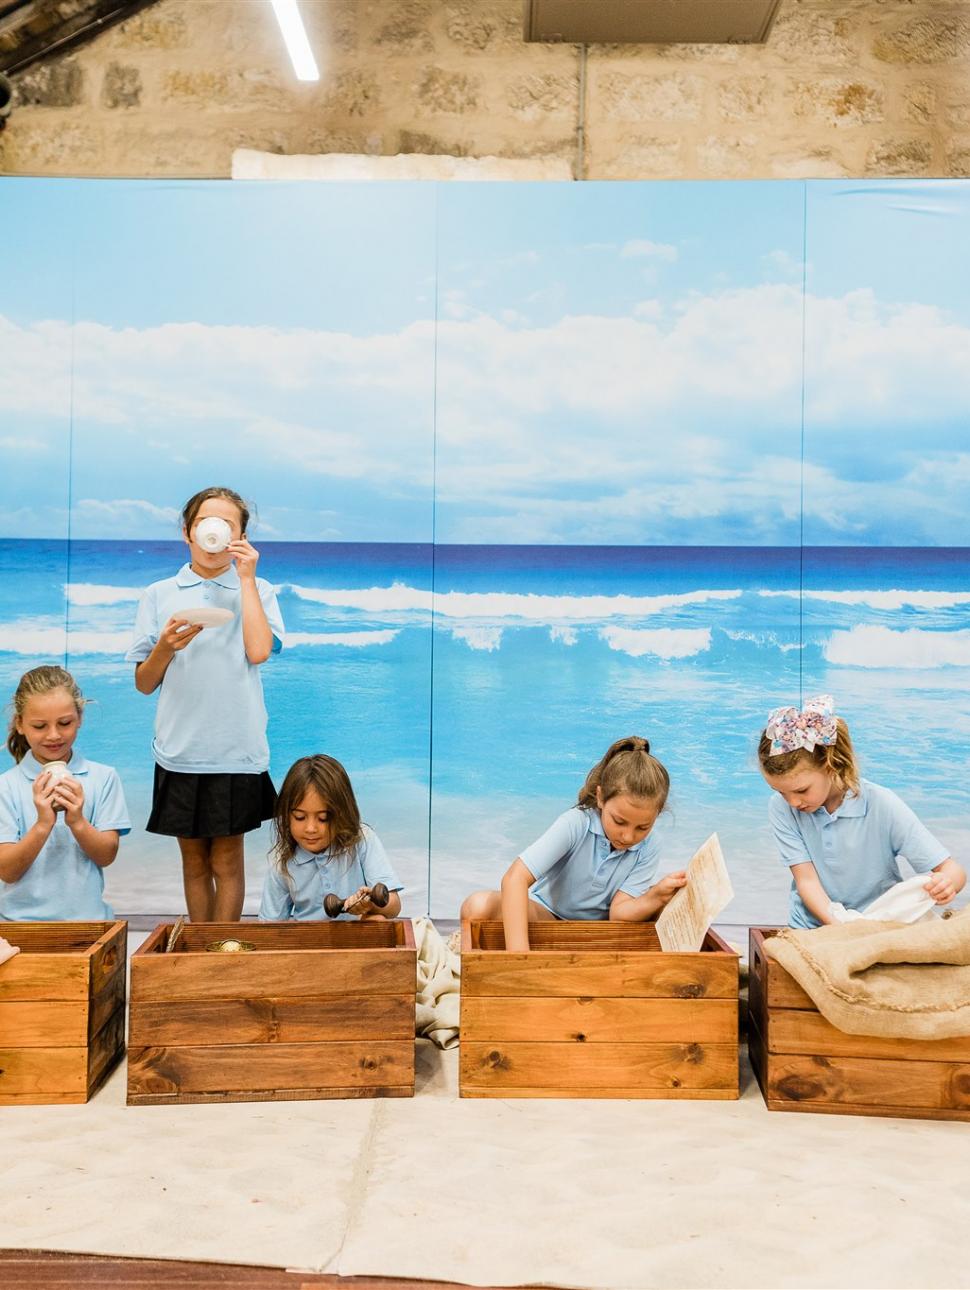 Girls in school uniform are unpacking a set of wooden crates in front of a painted backdrop